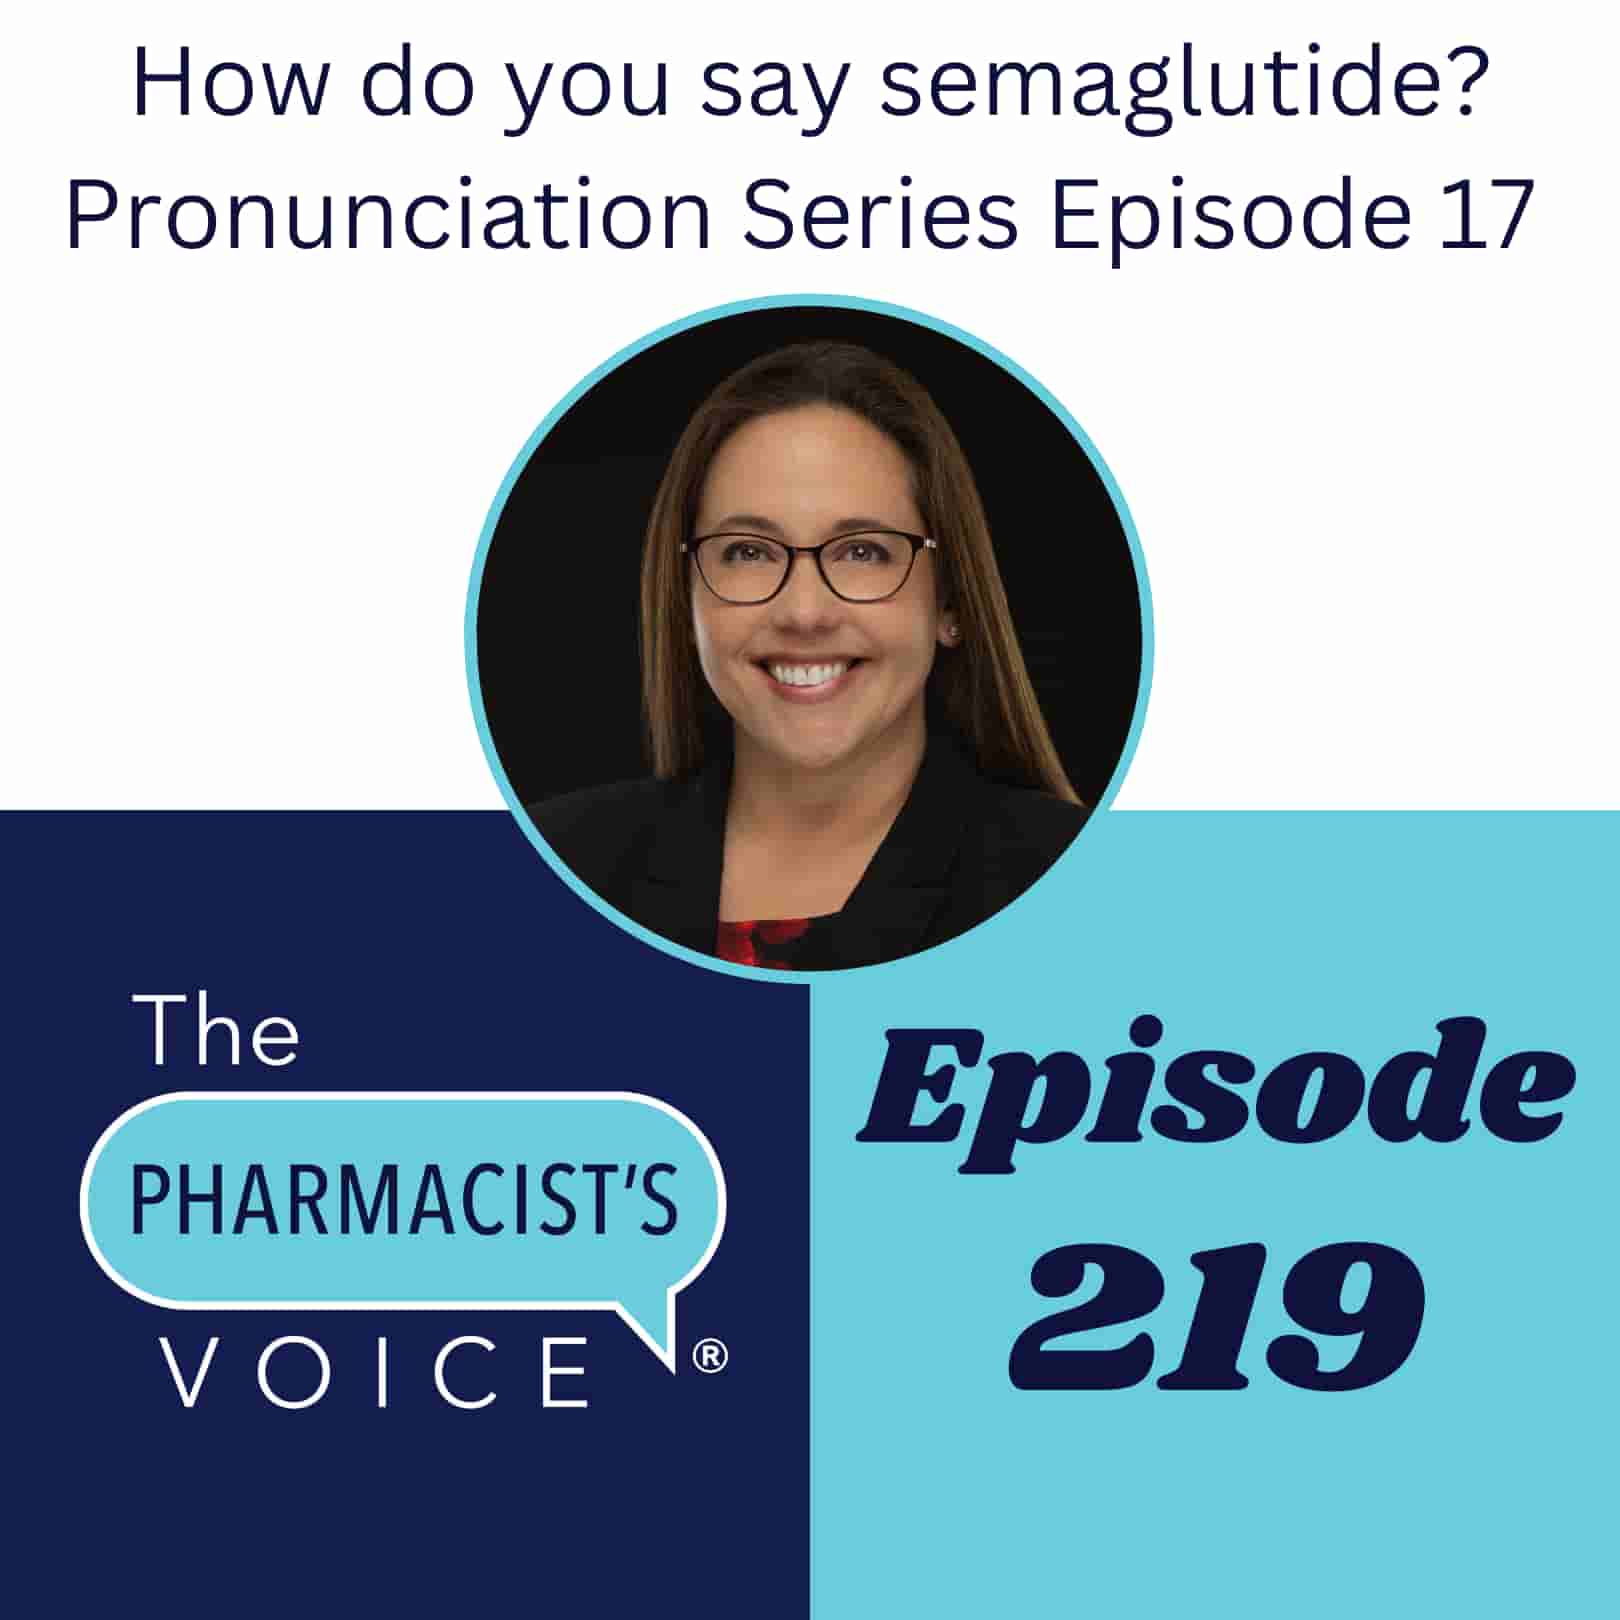 This is artwork for The Pharmacist's Voice Podcast Episode 219. The title is included in the artwork. It reads, "How do you say semaglutide?" Pronunciation Series Episode 17